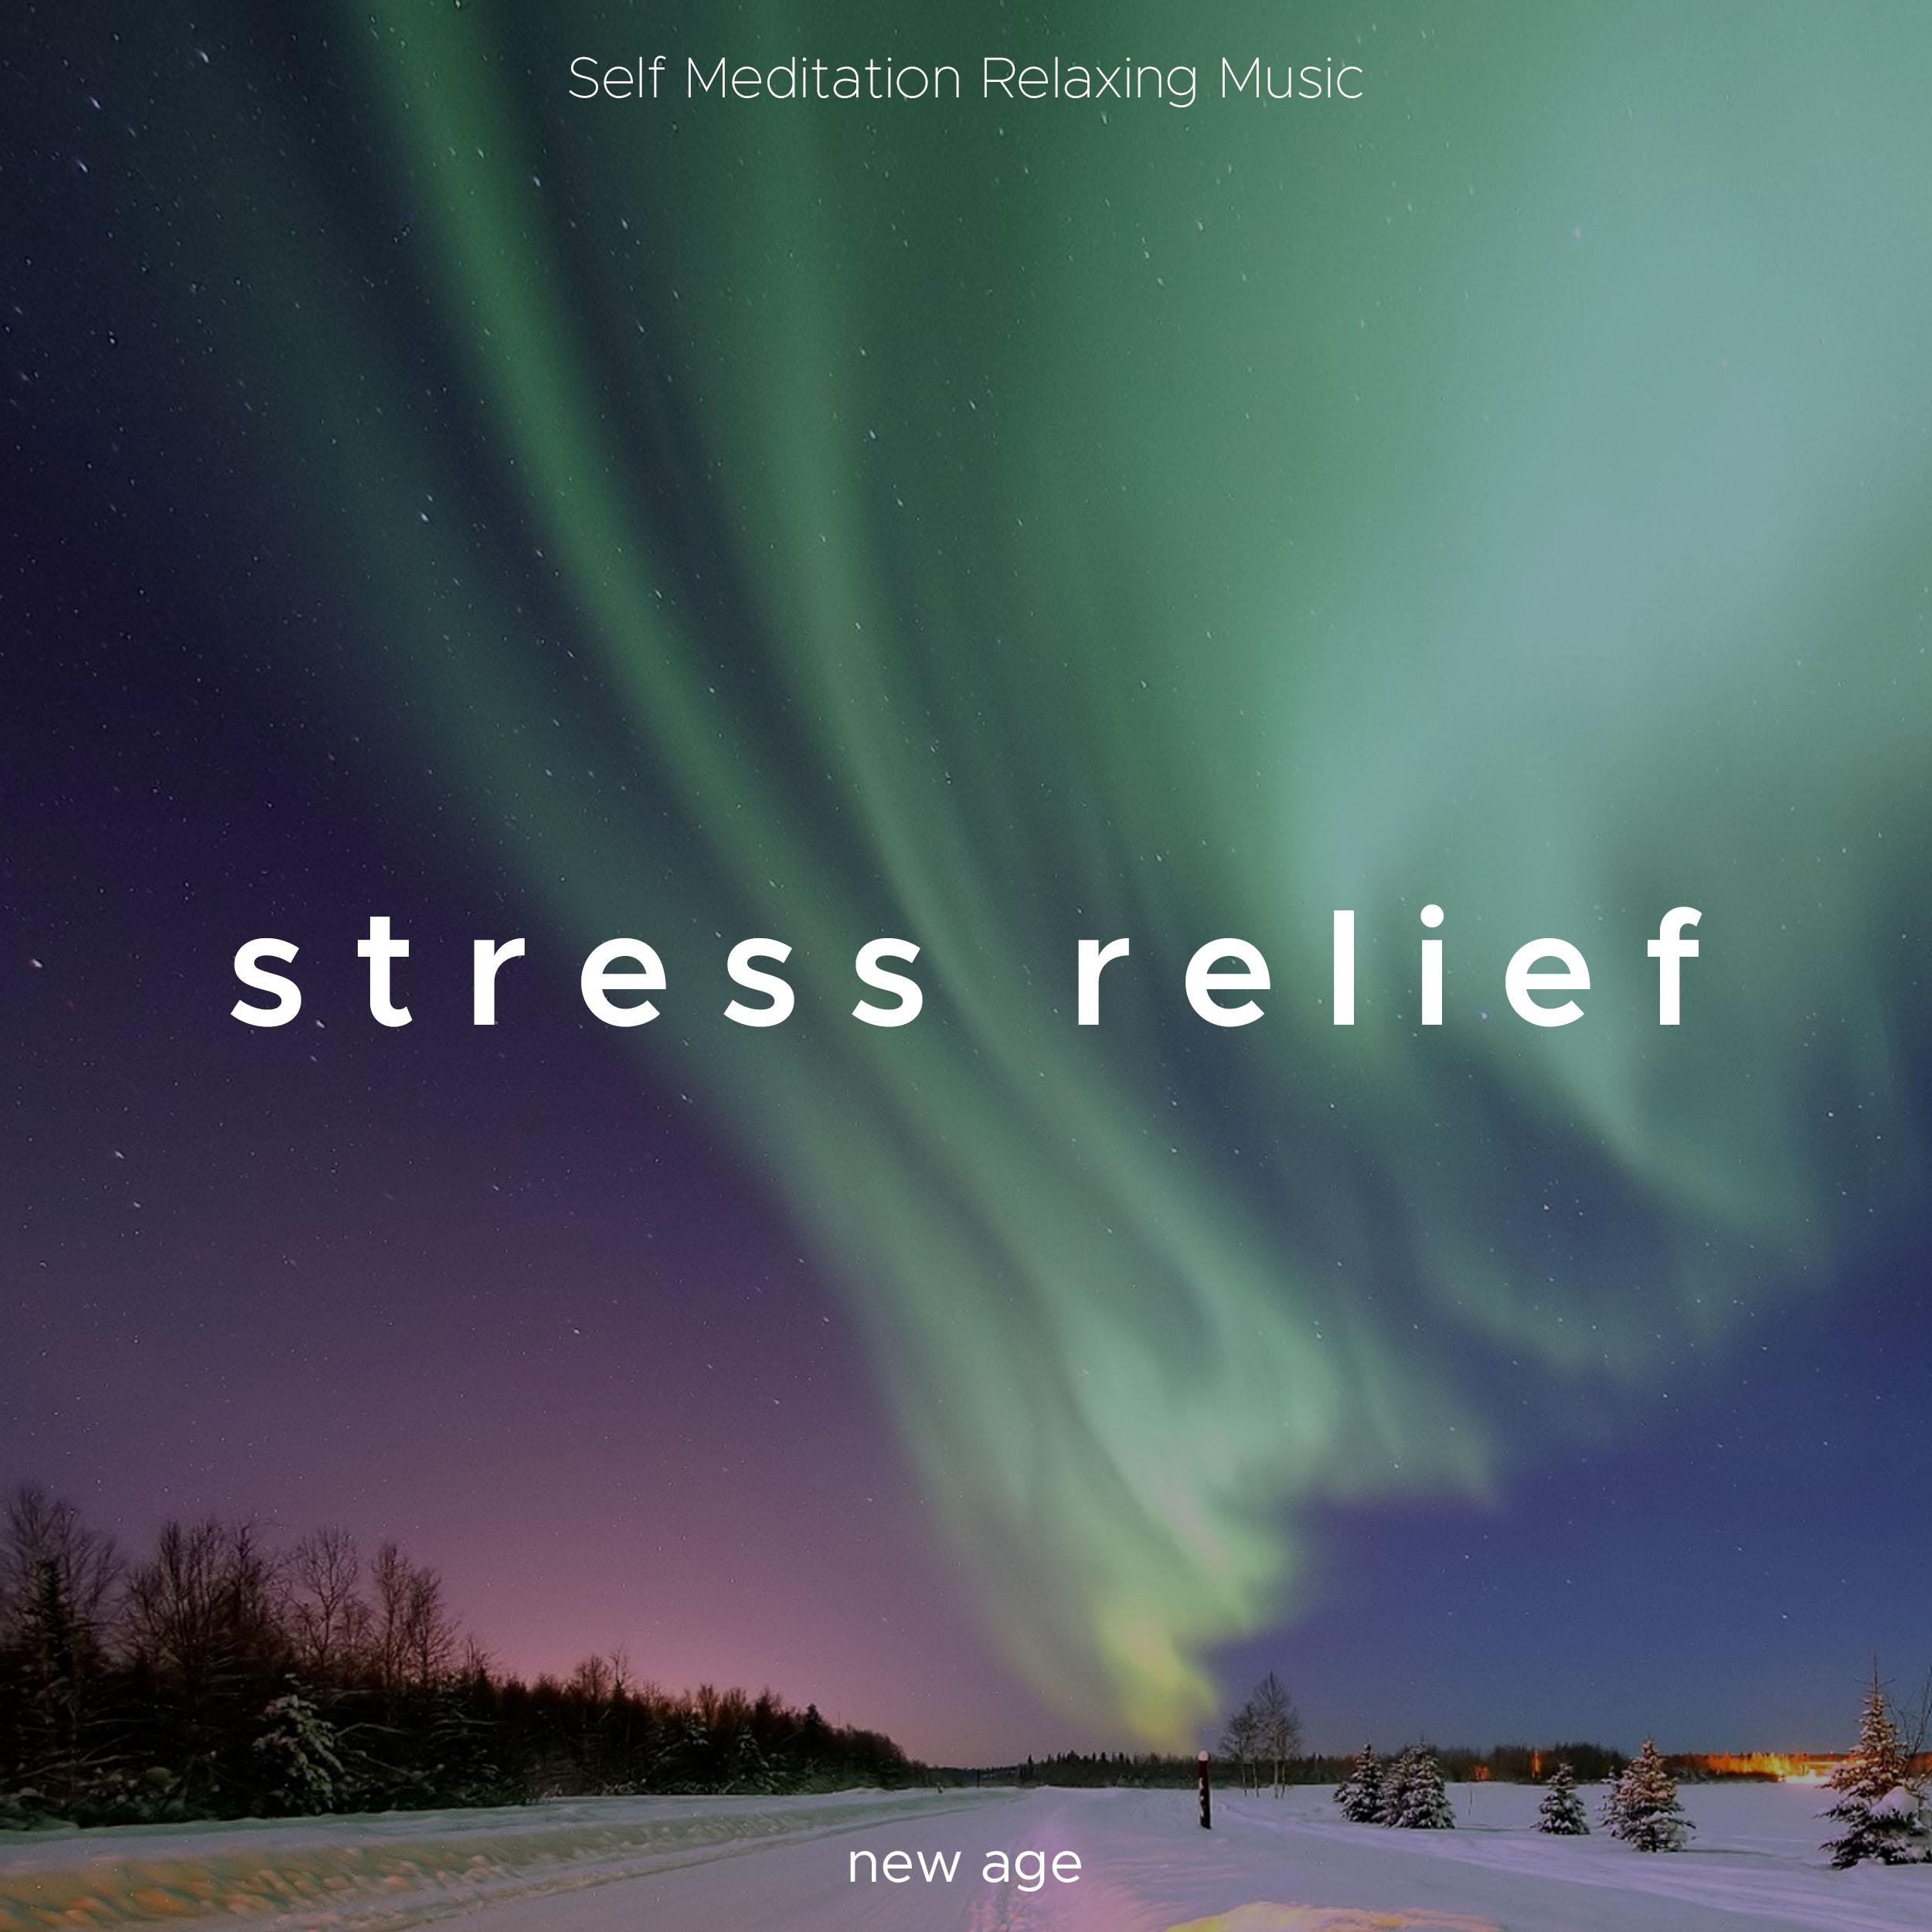 Stress Relief - Self Meditation Relaxing Music